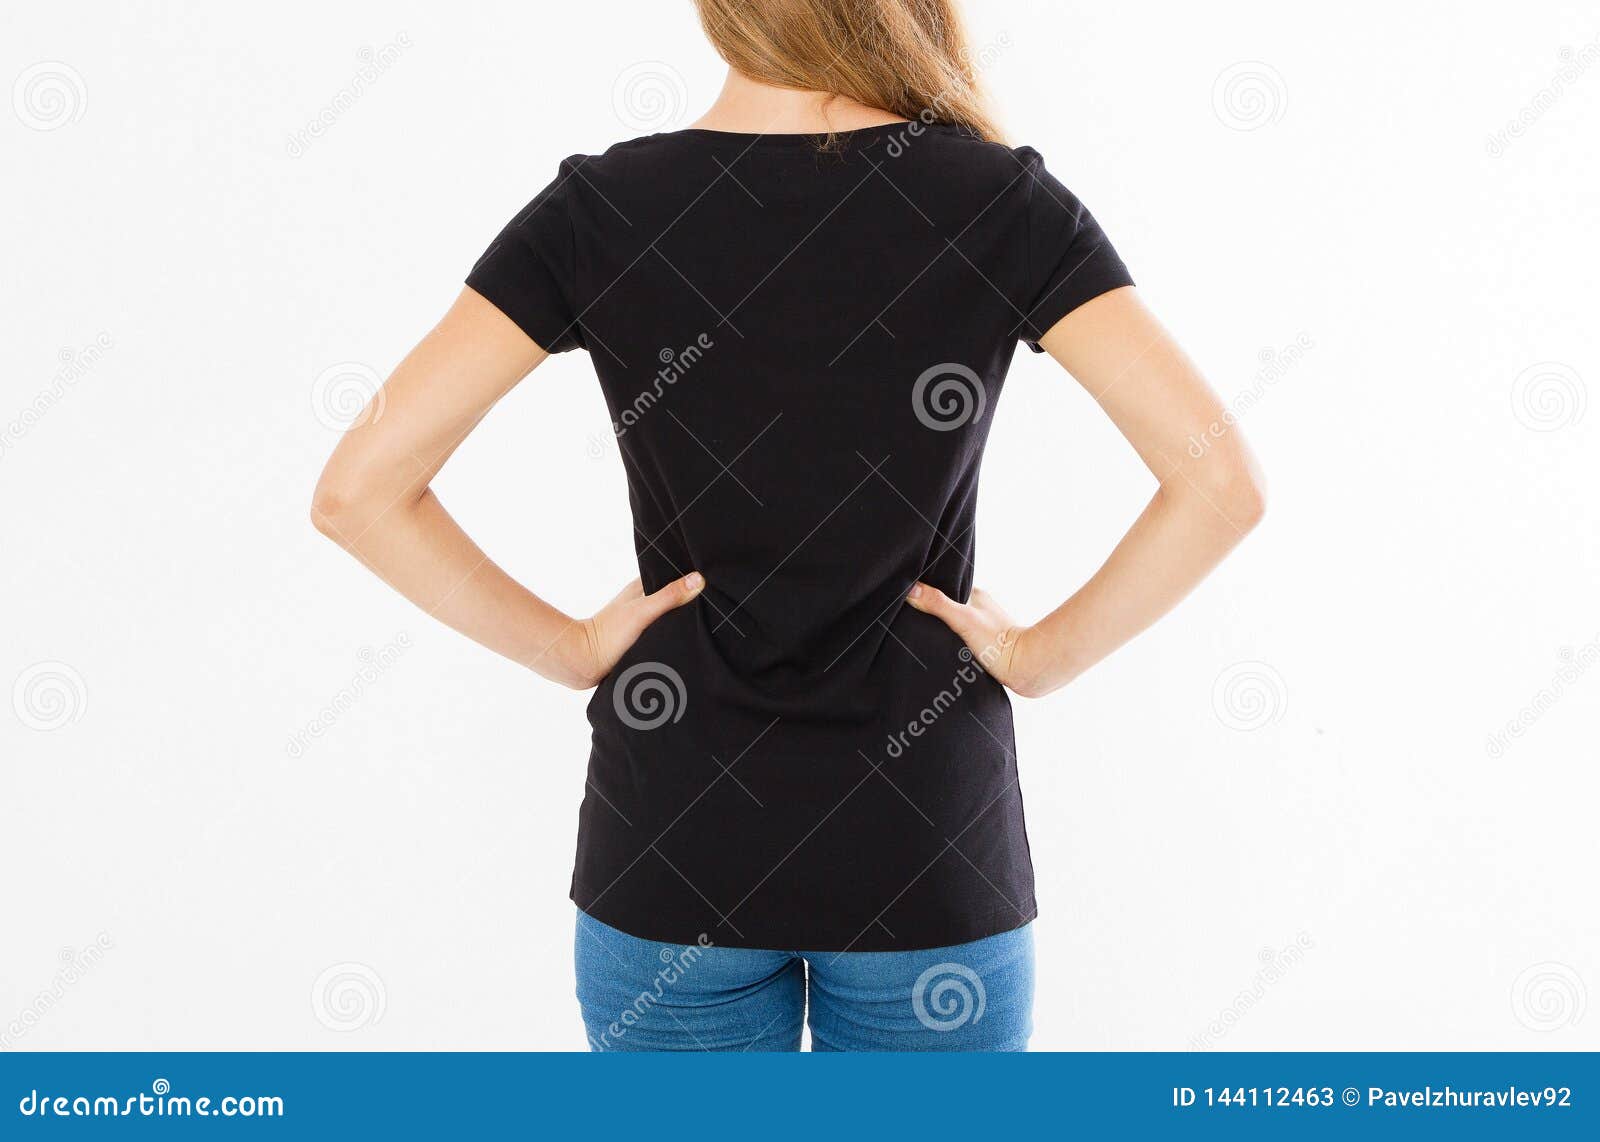 Download Back Rear View: Woman In Black Tshirt Isolated, Girl In T ...